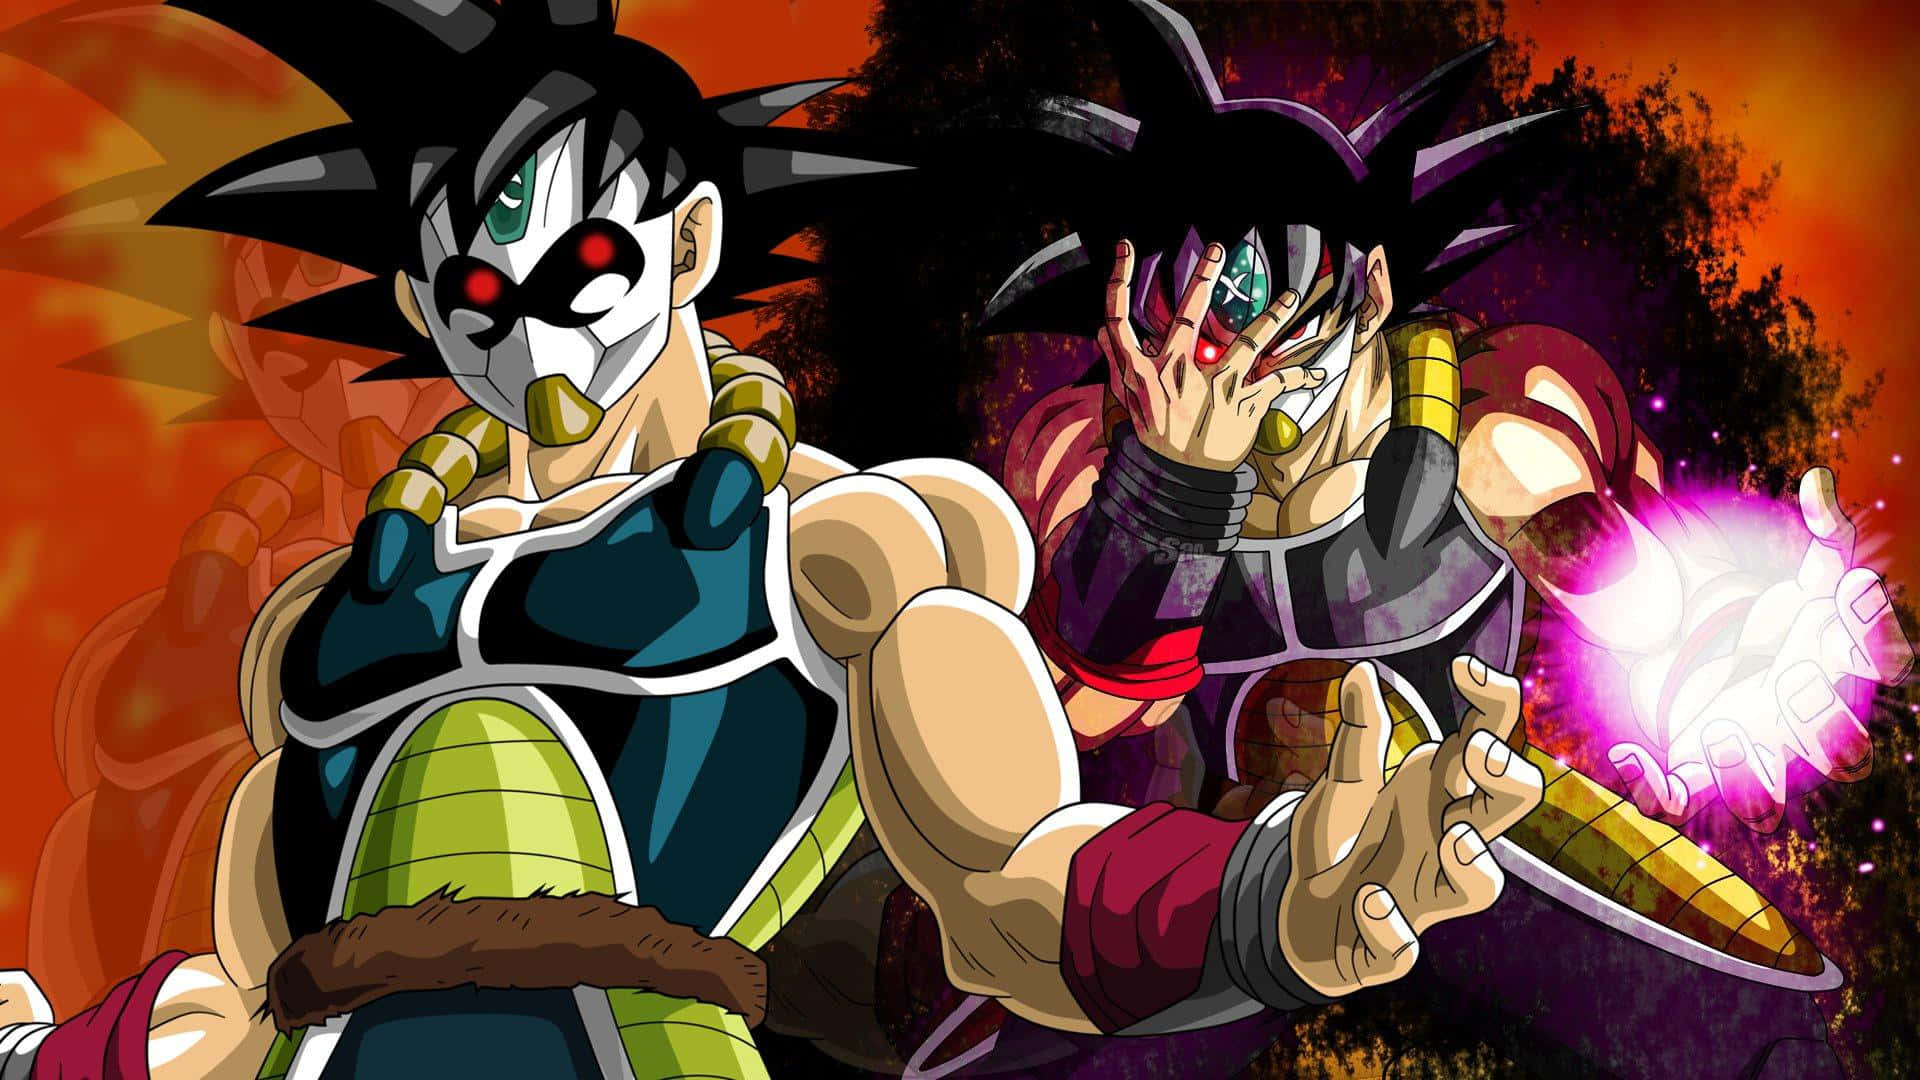 Power up and join the Goku Sized Quest with Bardock Wallpaper